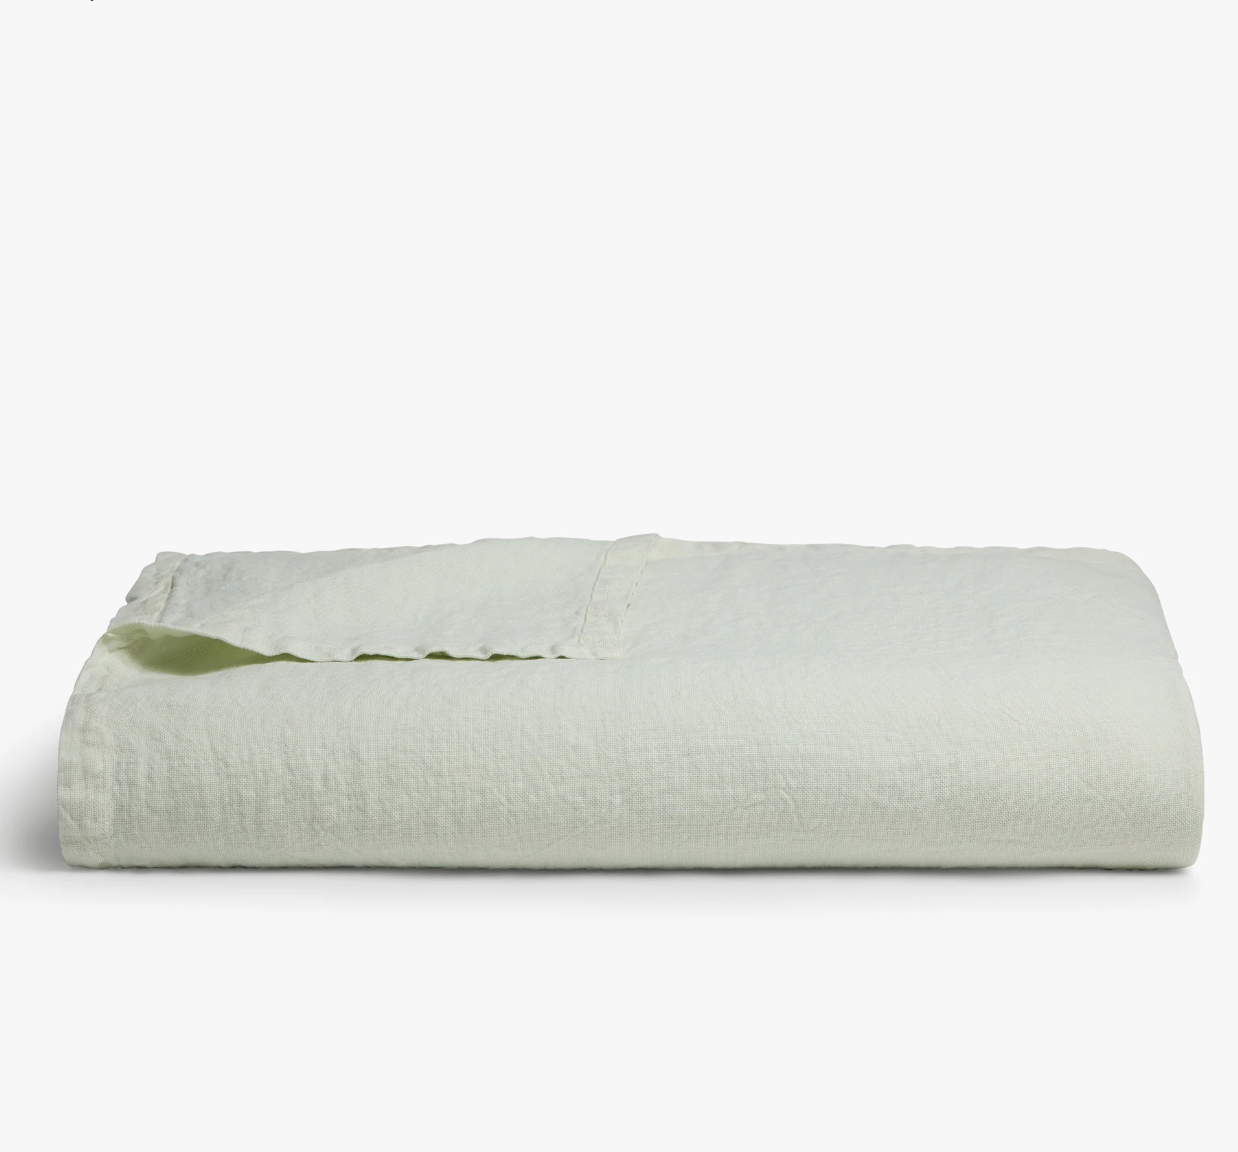 A Simple Decor Staple That Screams “Summer House”: The Lightweight Throw Blanket